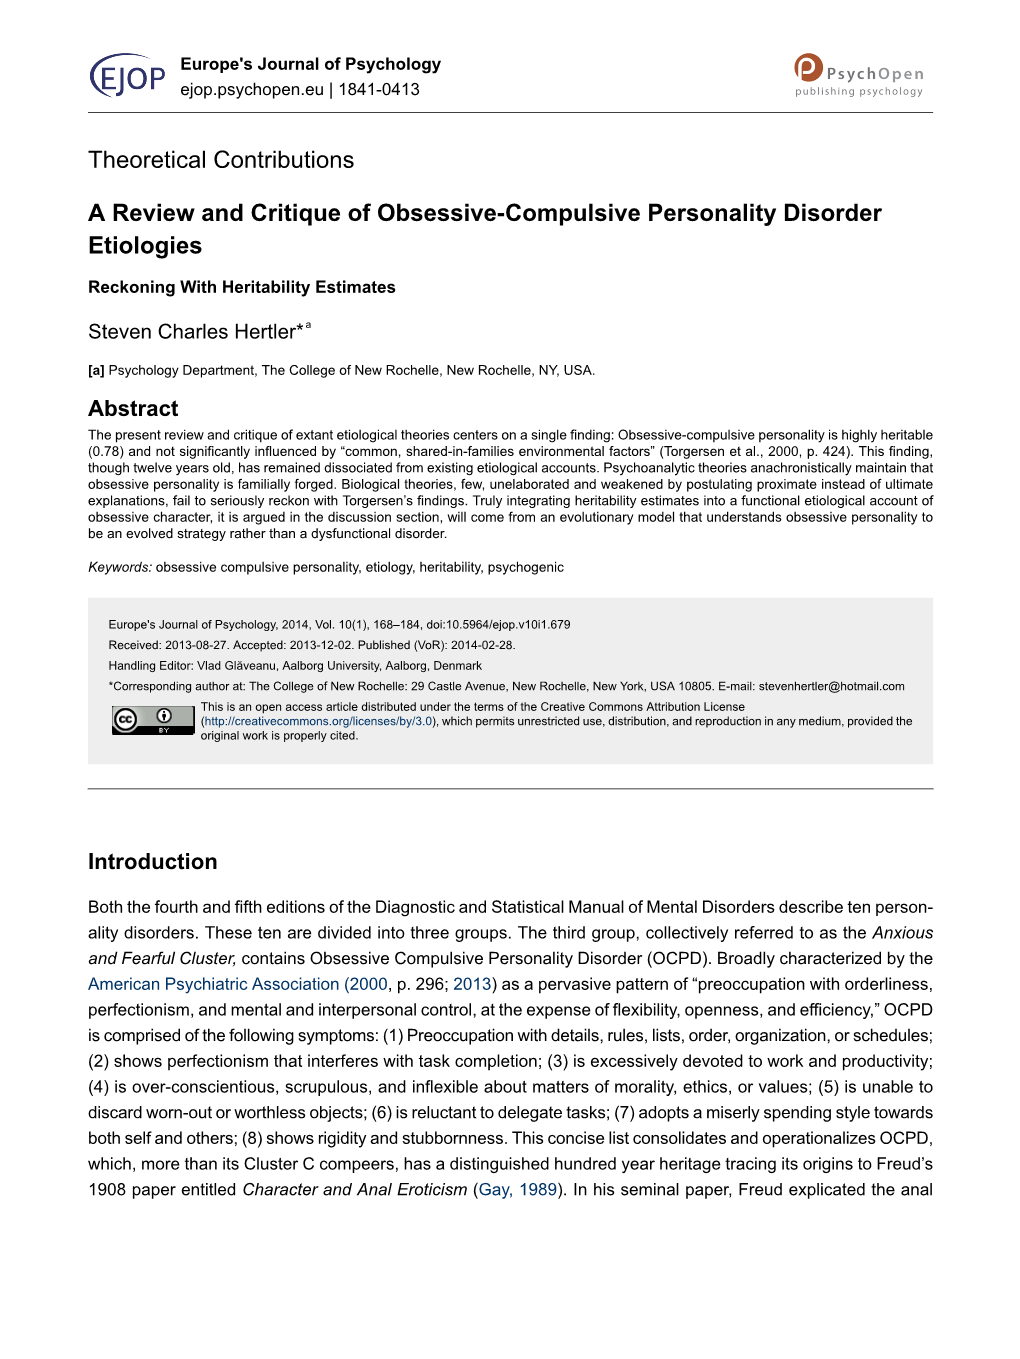 A Review and Critique of Obsessive-Compulsive Personality Disorder Etiologies